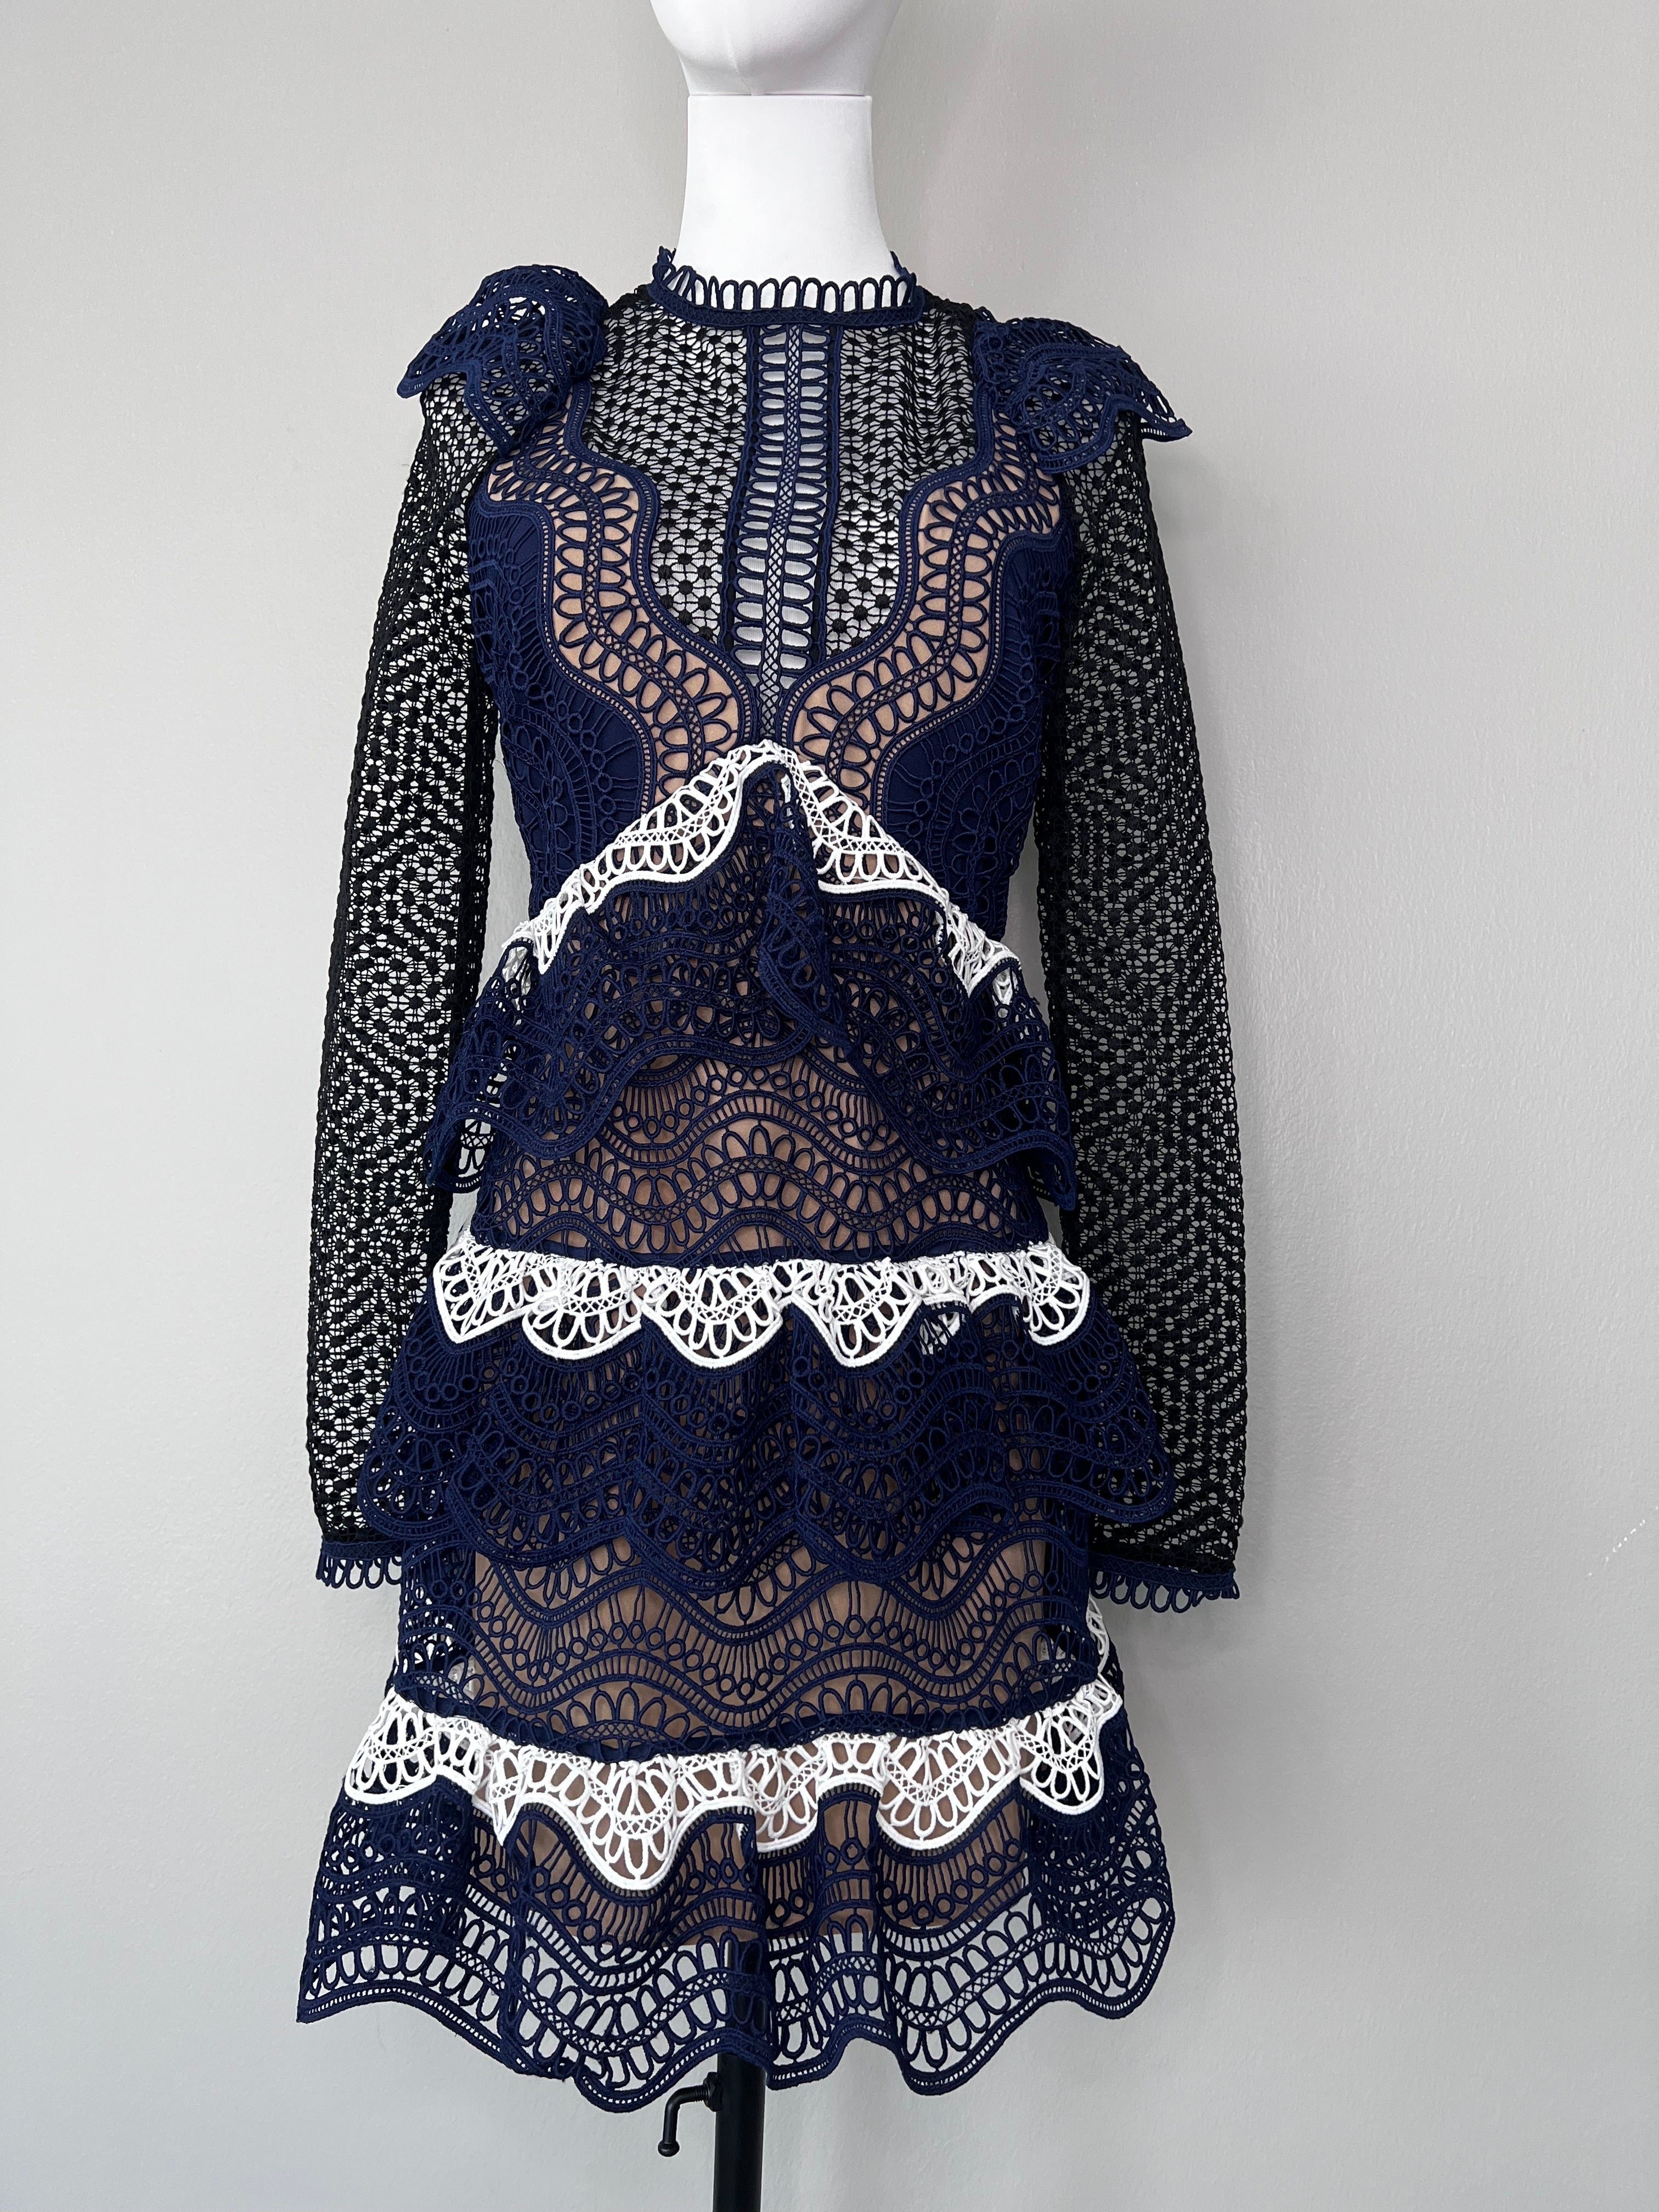 Navy blue sheer patterned layered dress with long black sleeves - SELF-PORTRAIT